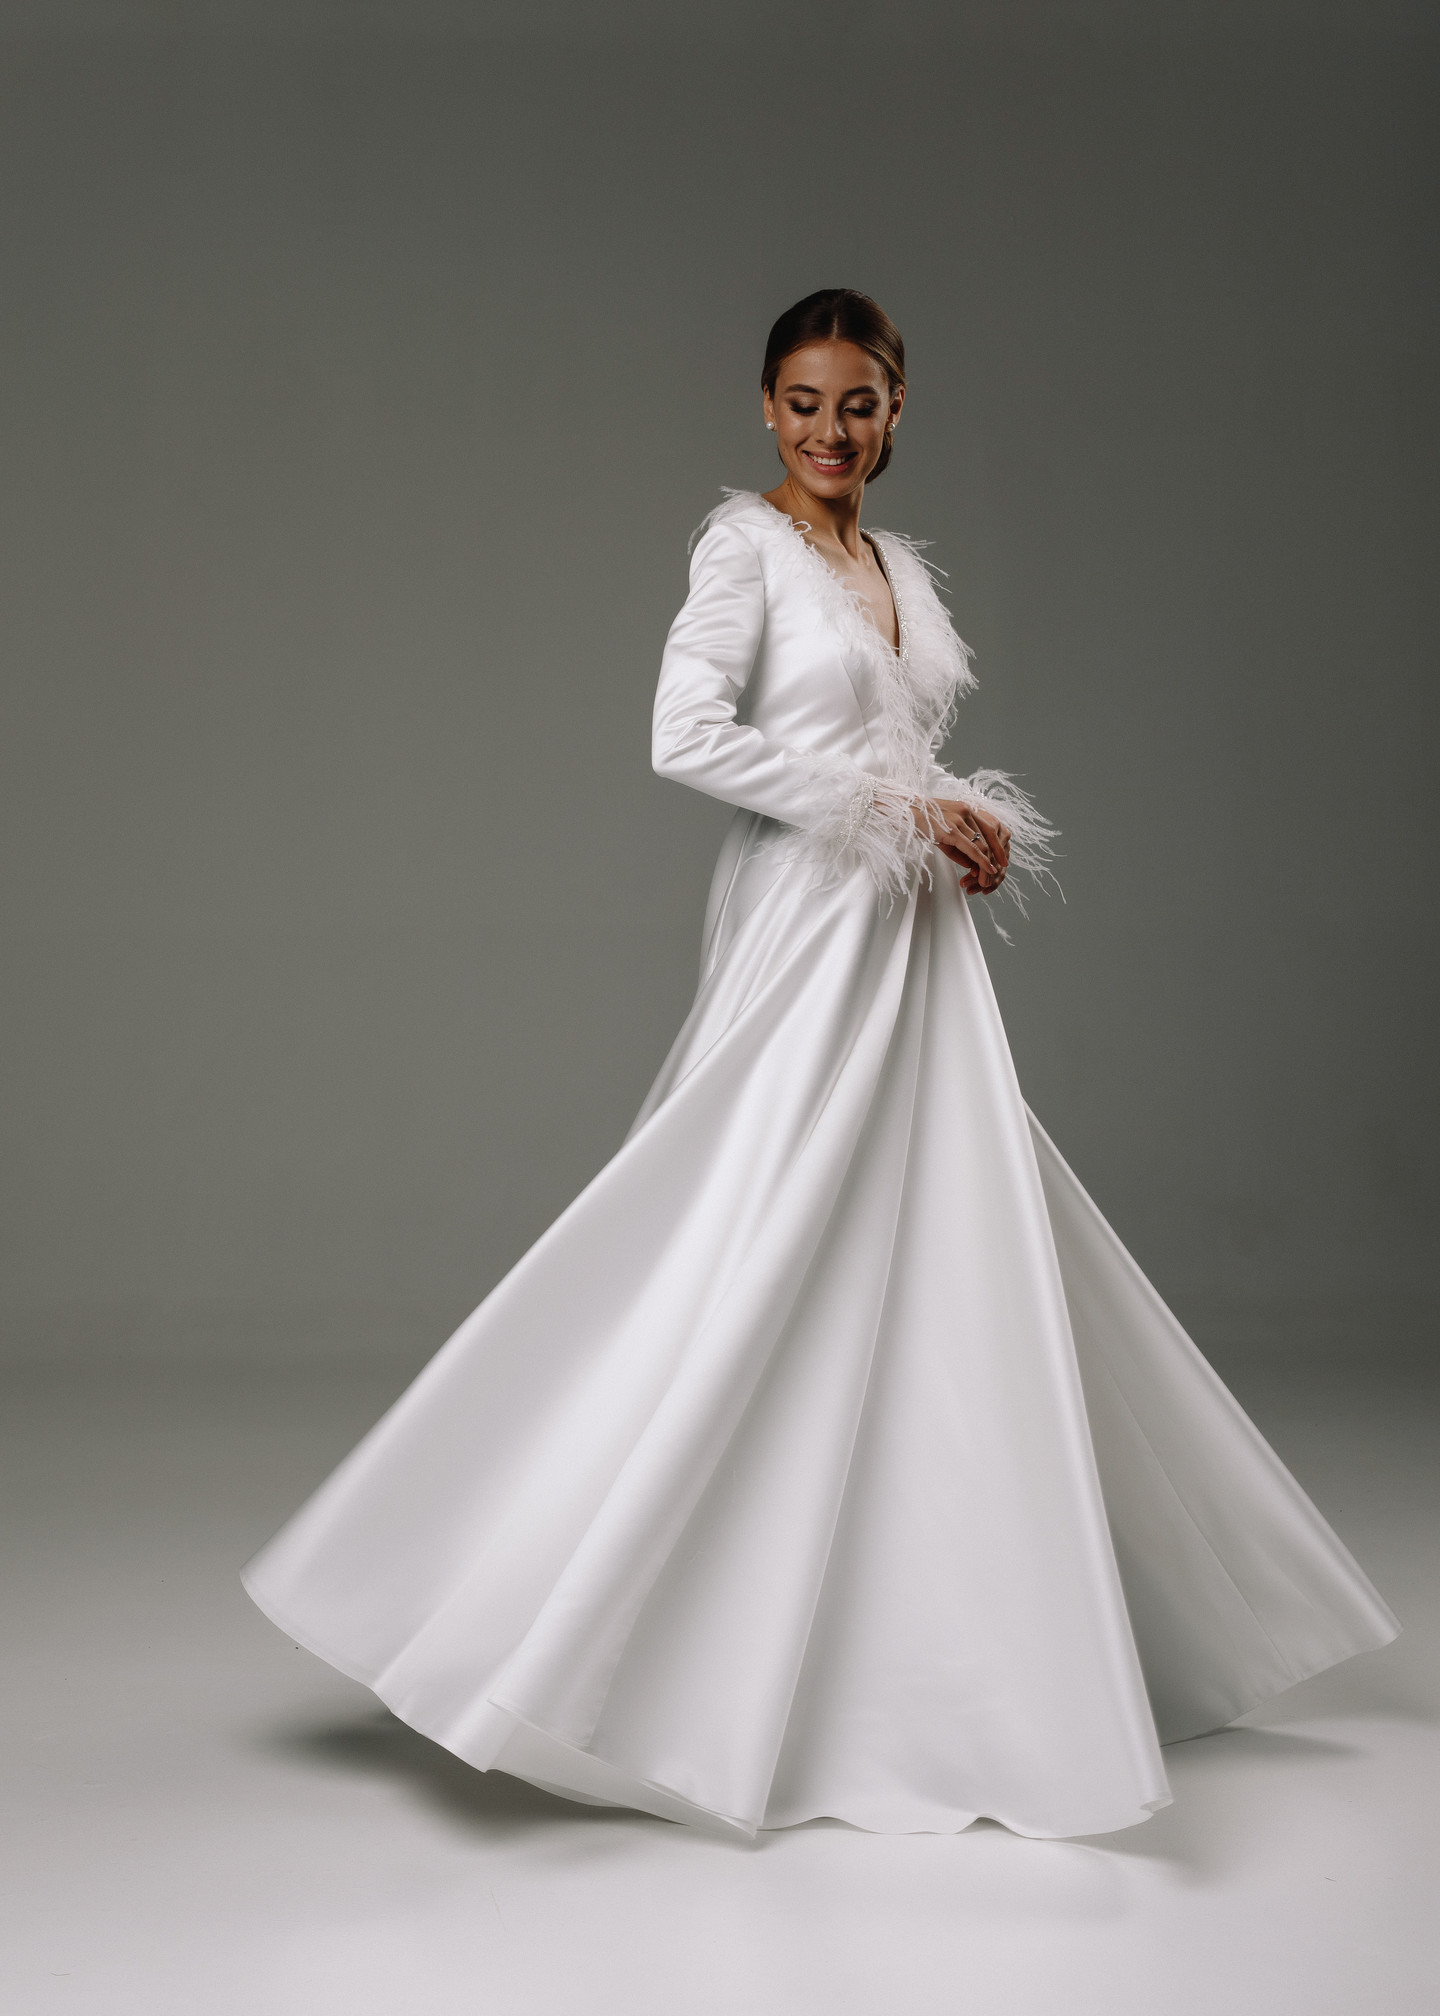 Anisya gown, 2020, couture, dress, bridal, off-white, satin, embroidery, A-line, sleeves, discount, sale